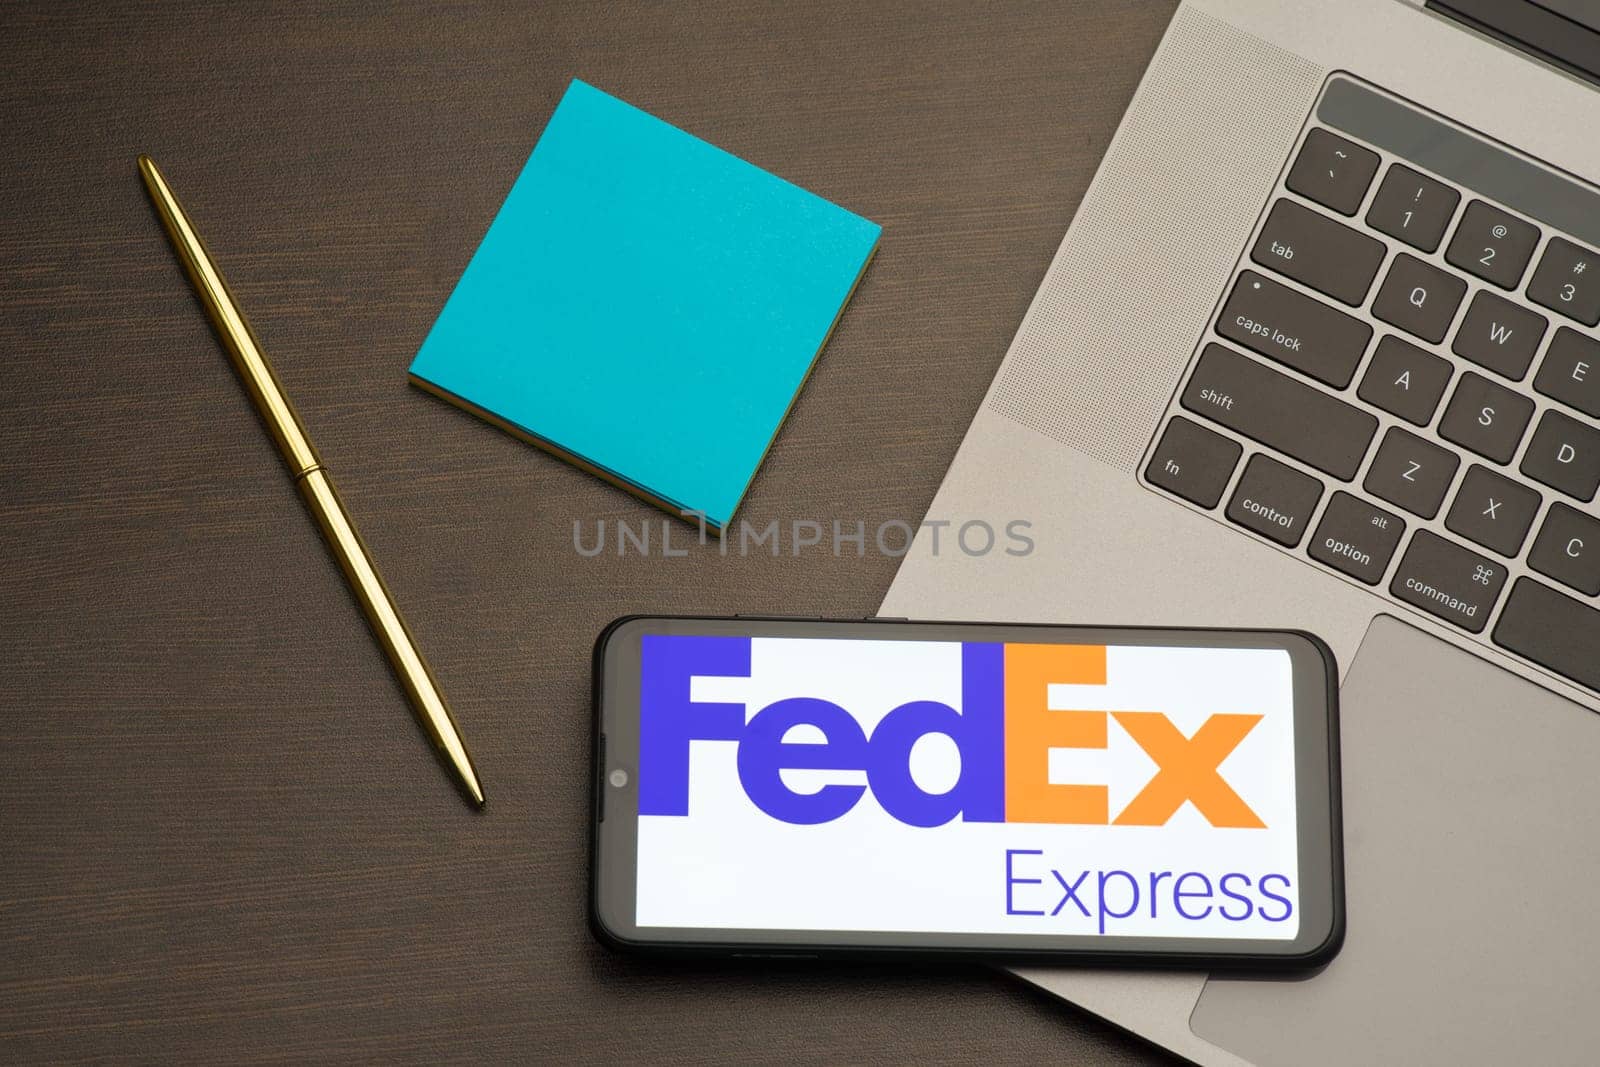 Tula, Russia - September 17, 2020: Logo FedEx on a smartphone near modern laptop on a table.